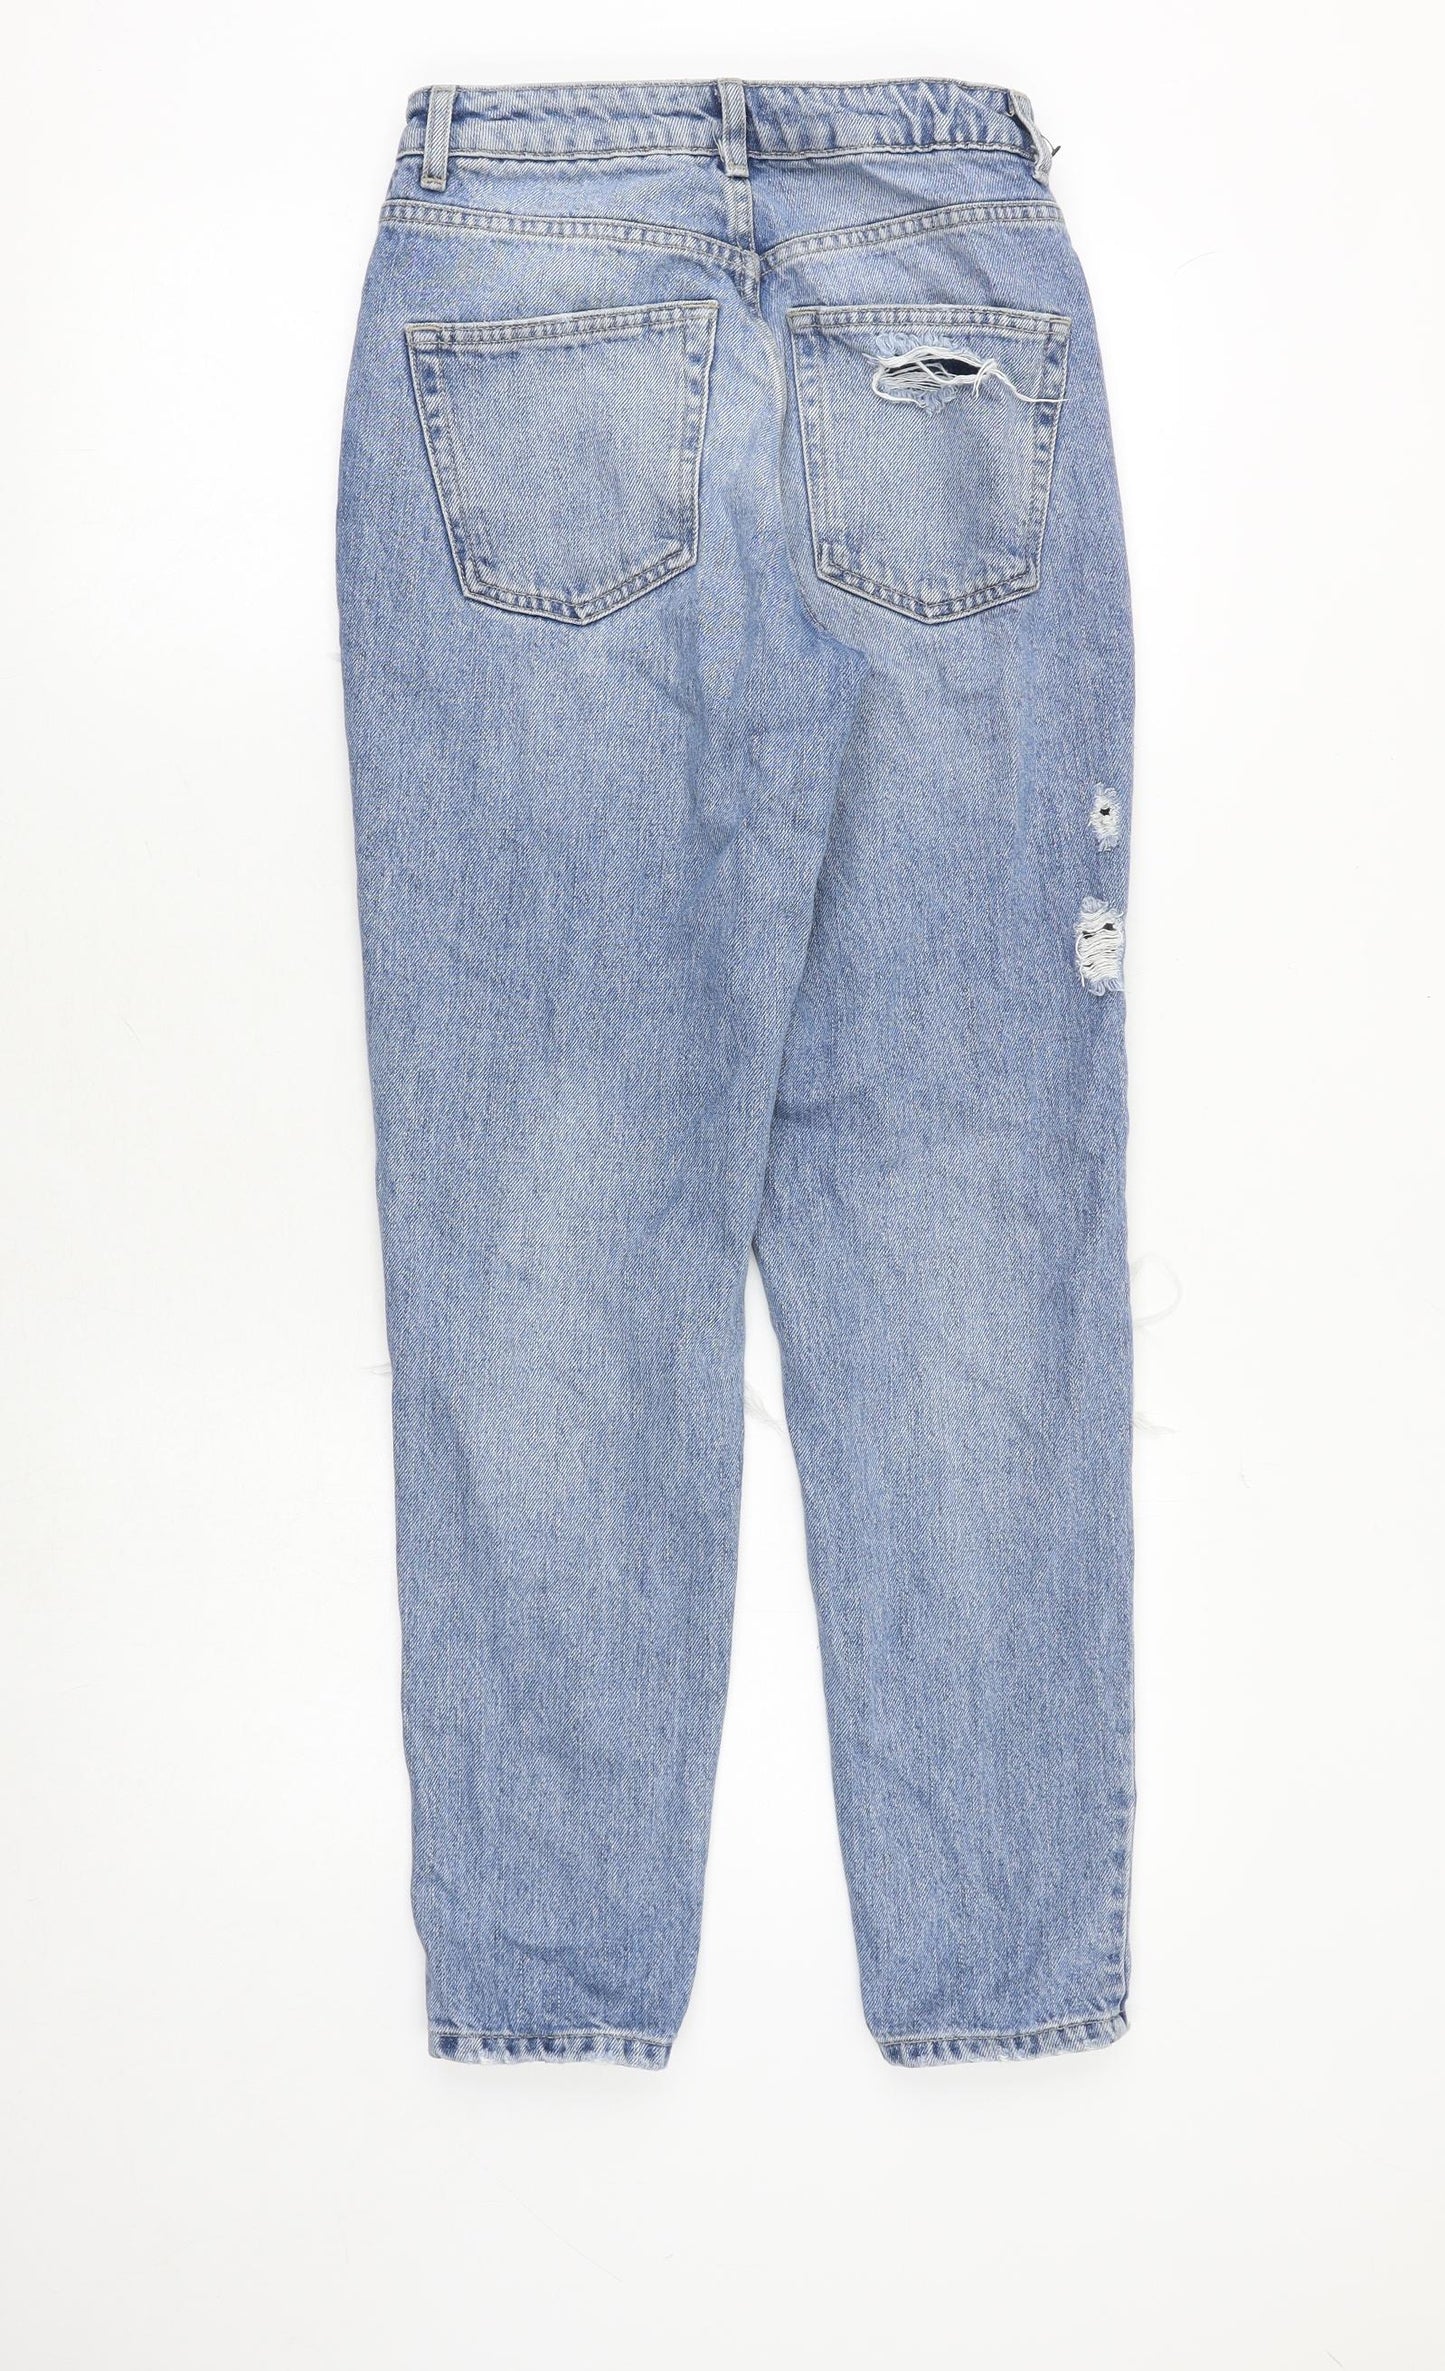 Topshop Womens Blue Cotton Skinny Jeans Size 25 in Regular Zip